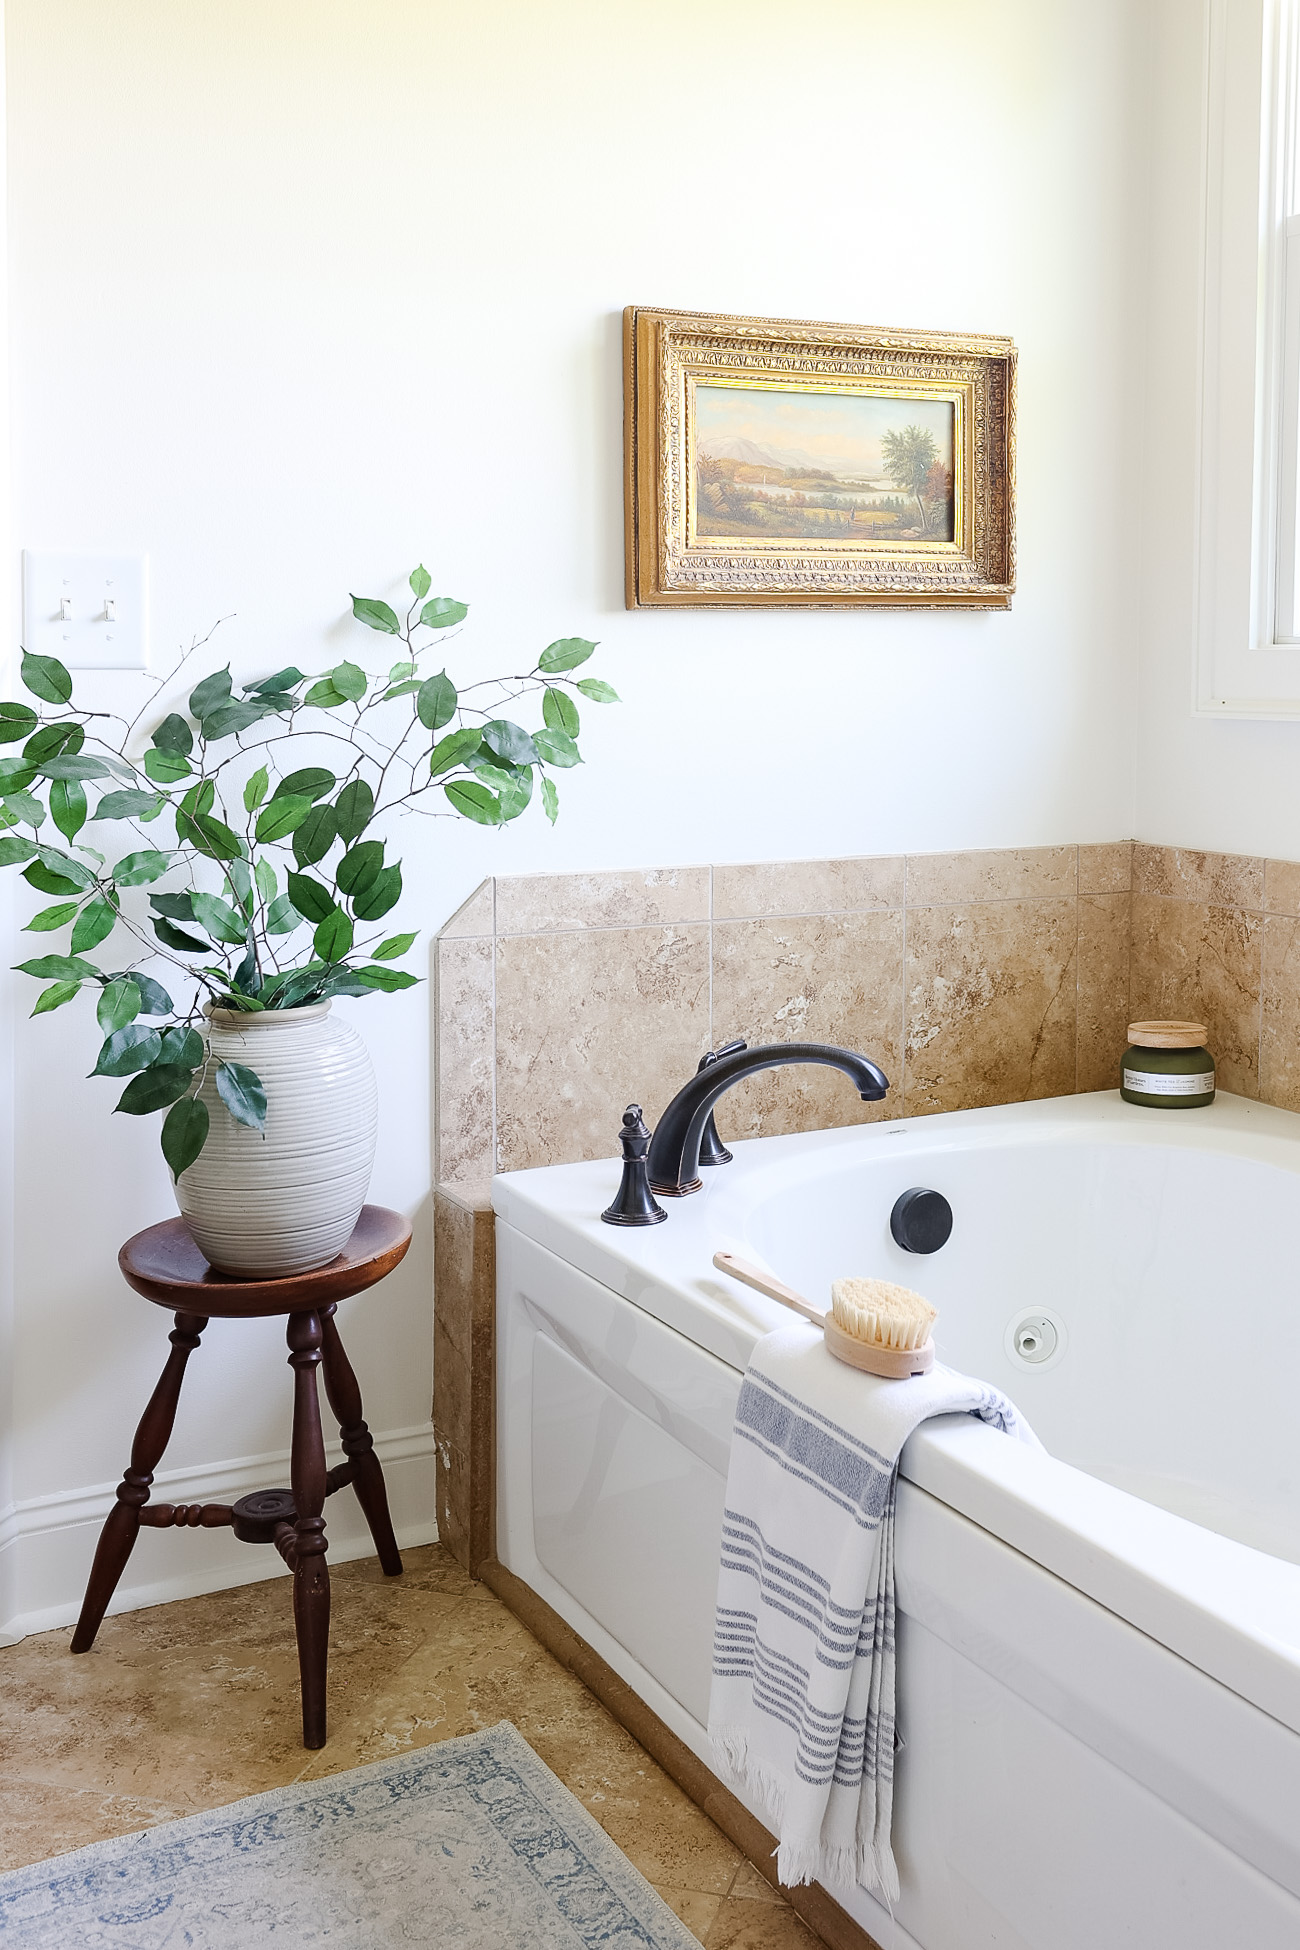 bathtub with towel and artwork with vase of greenery